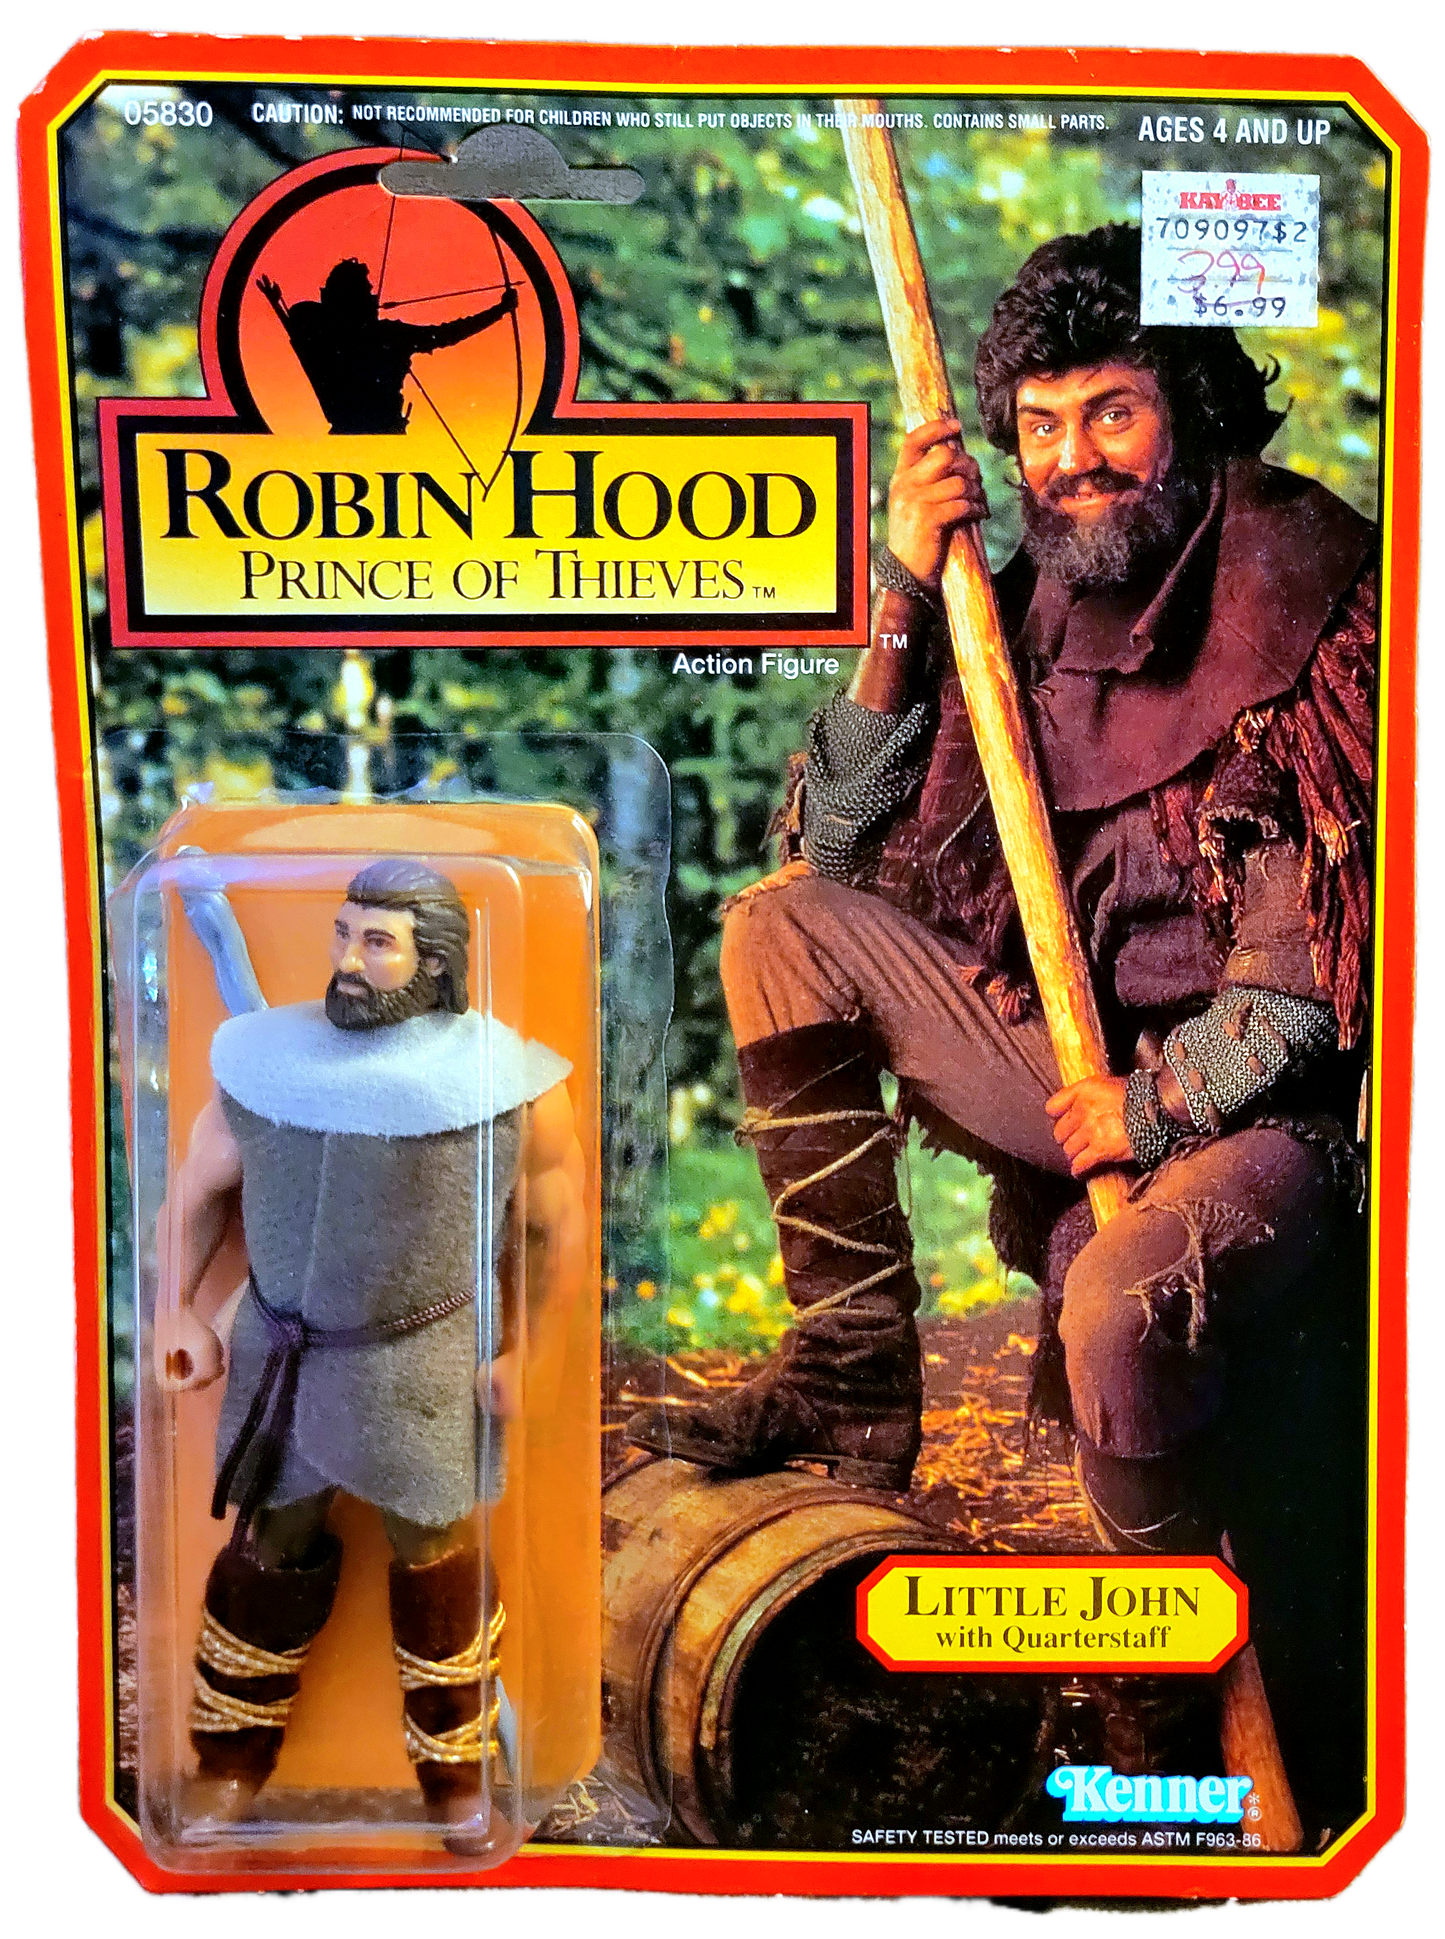 Kenner 1991 Robin Hood Prince of Thieves Little John with Quarterstaff Action Figure